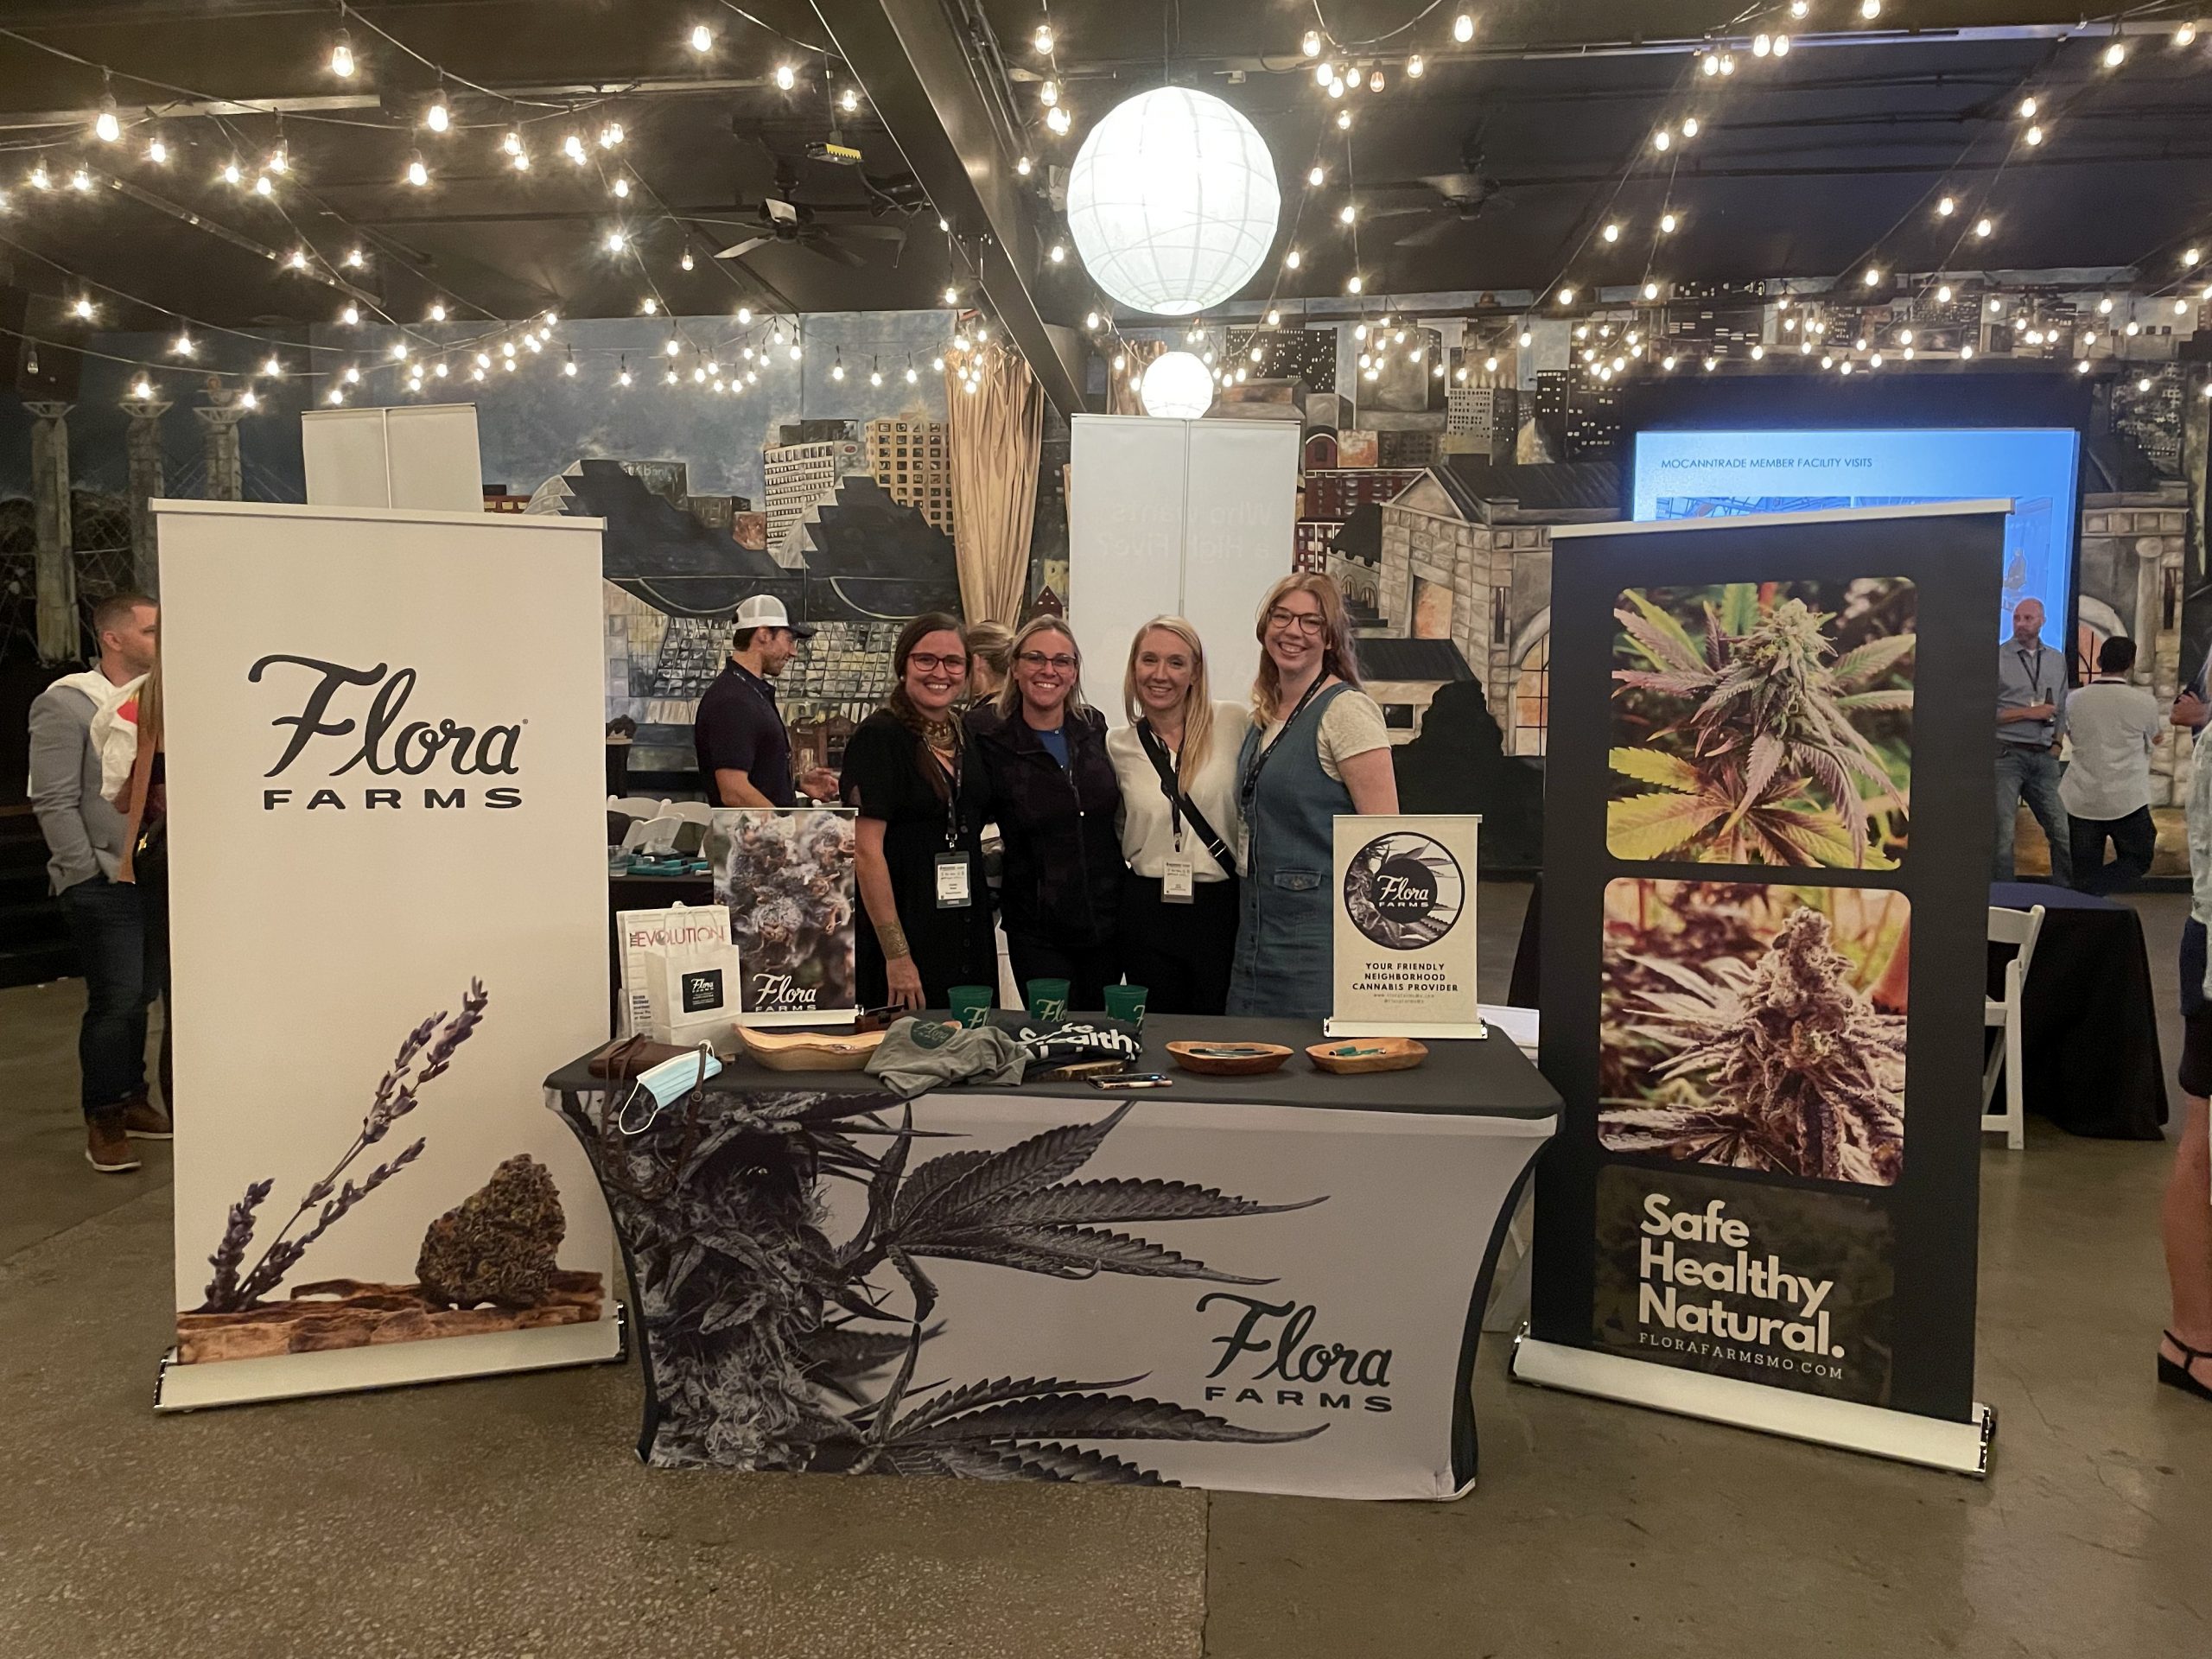 Flora Farms marketing team poses with Cannabis Care Team members April Hatch and Melissa Rush